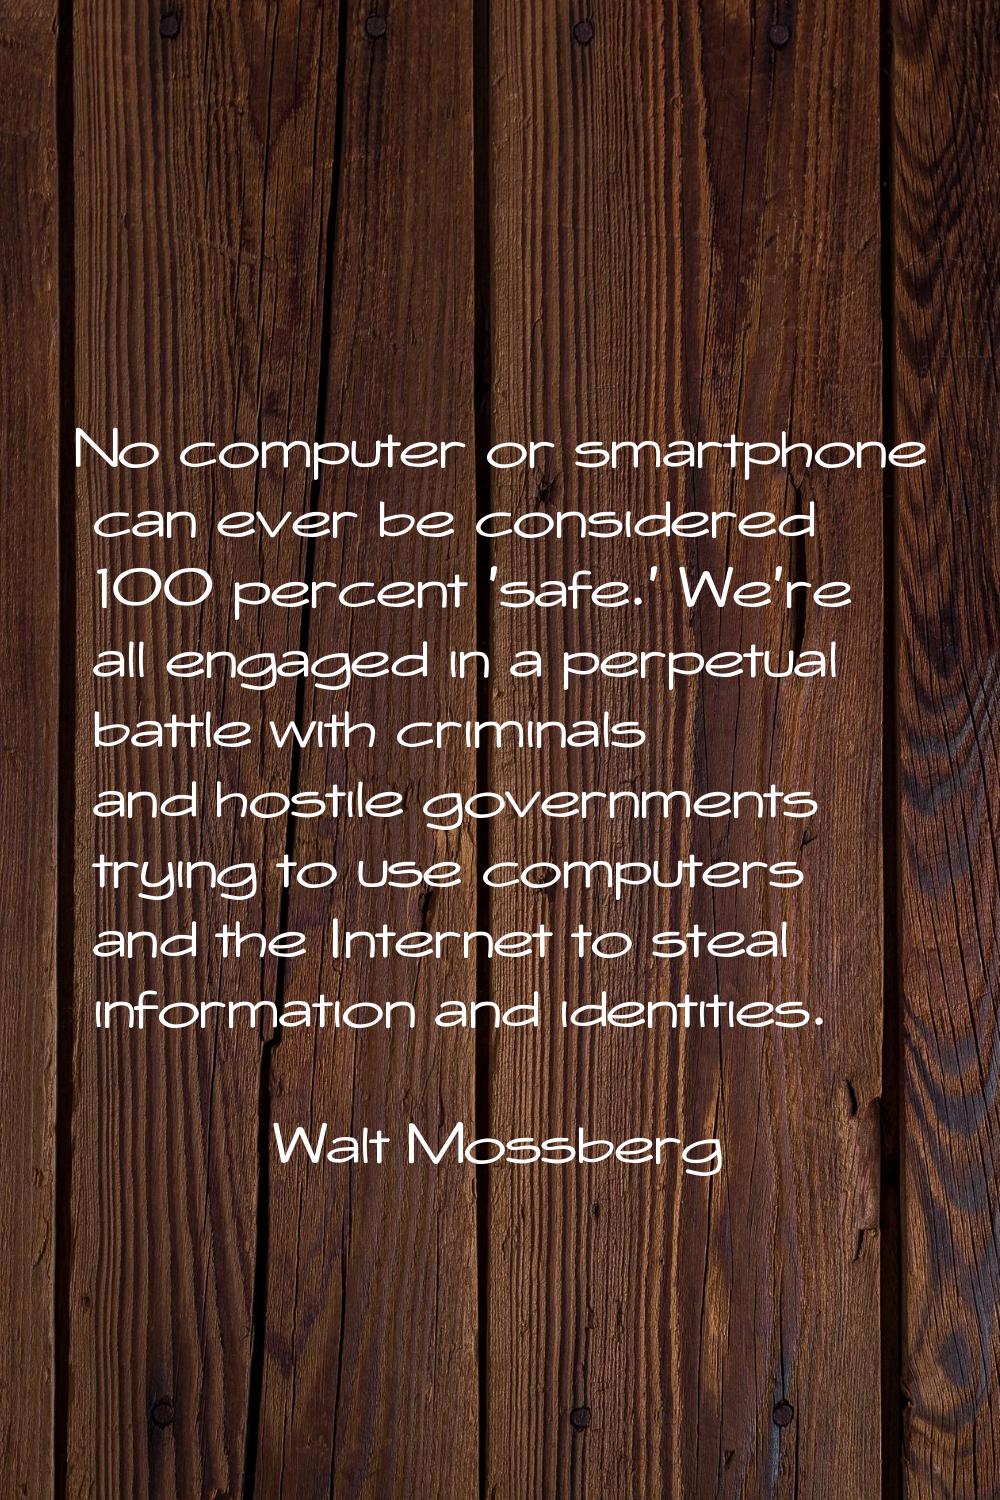 No computer or smartphone can ever be considered 100 percent 'safe.' We're all engaged in a perpetu